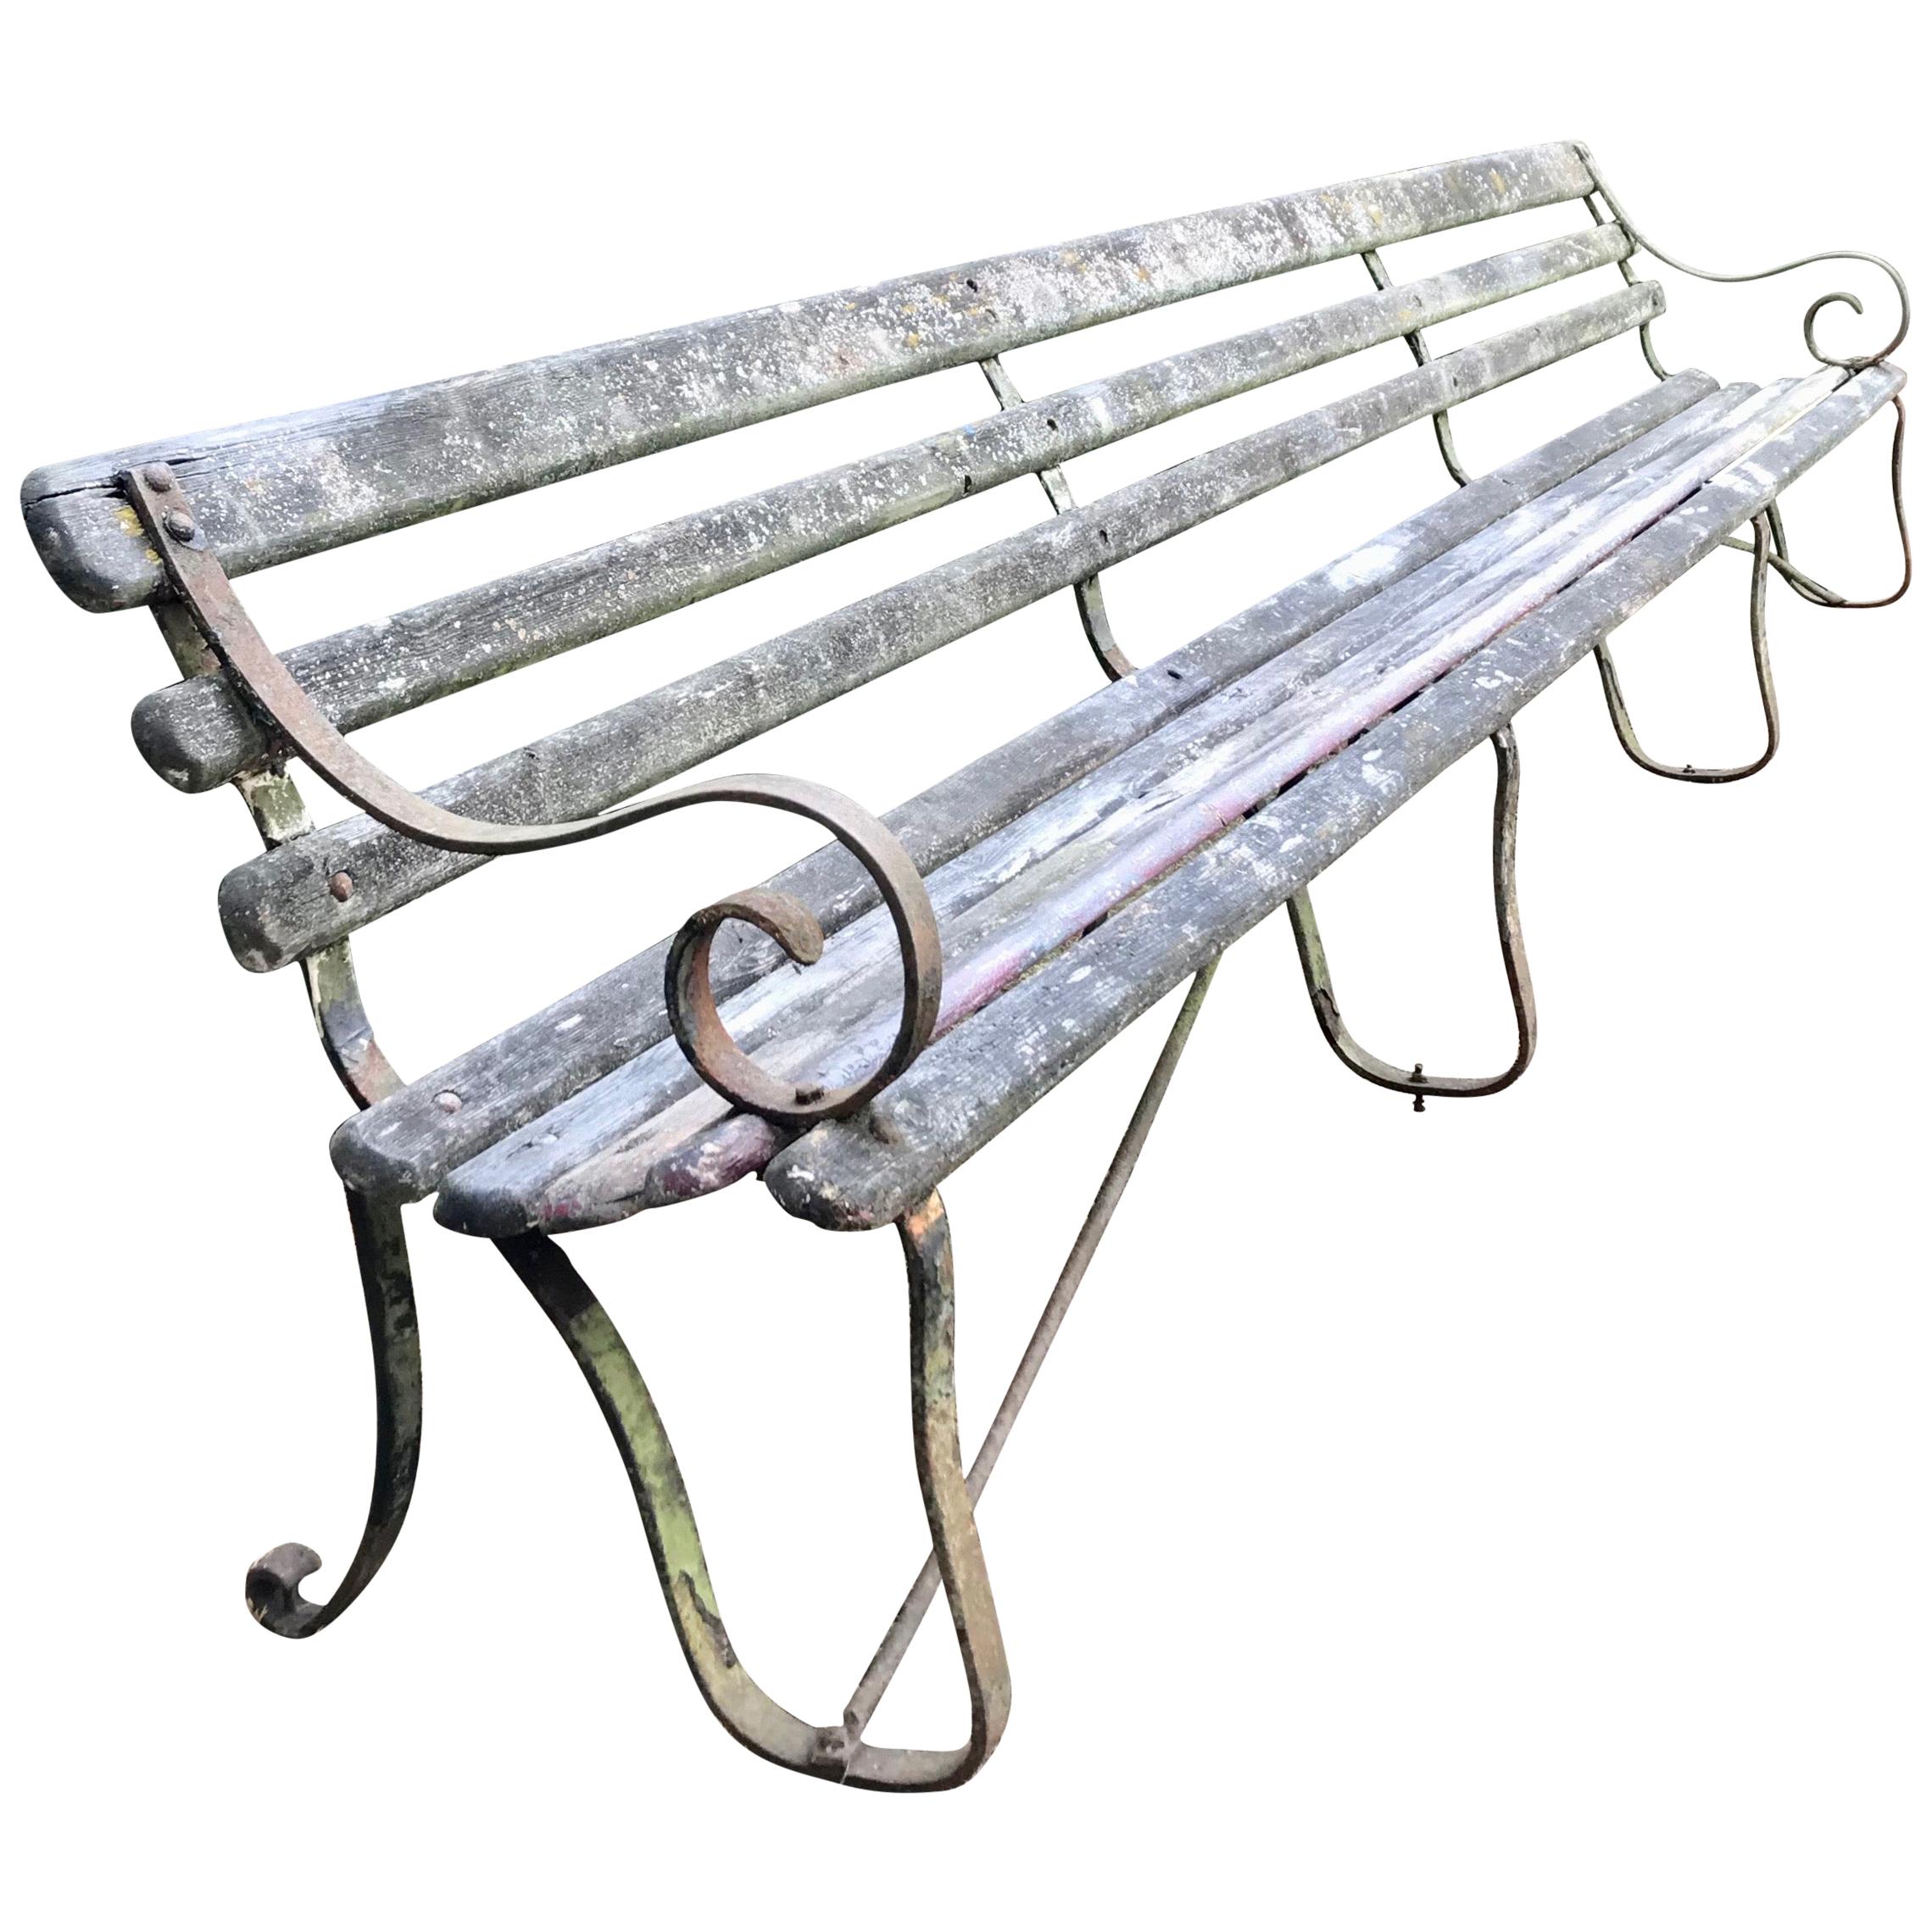 Long English 19th Century Wood and Wrought Iron Railway Station Bench